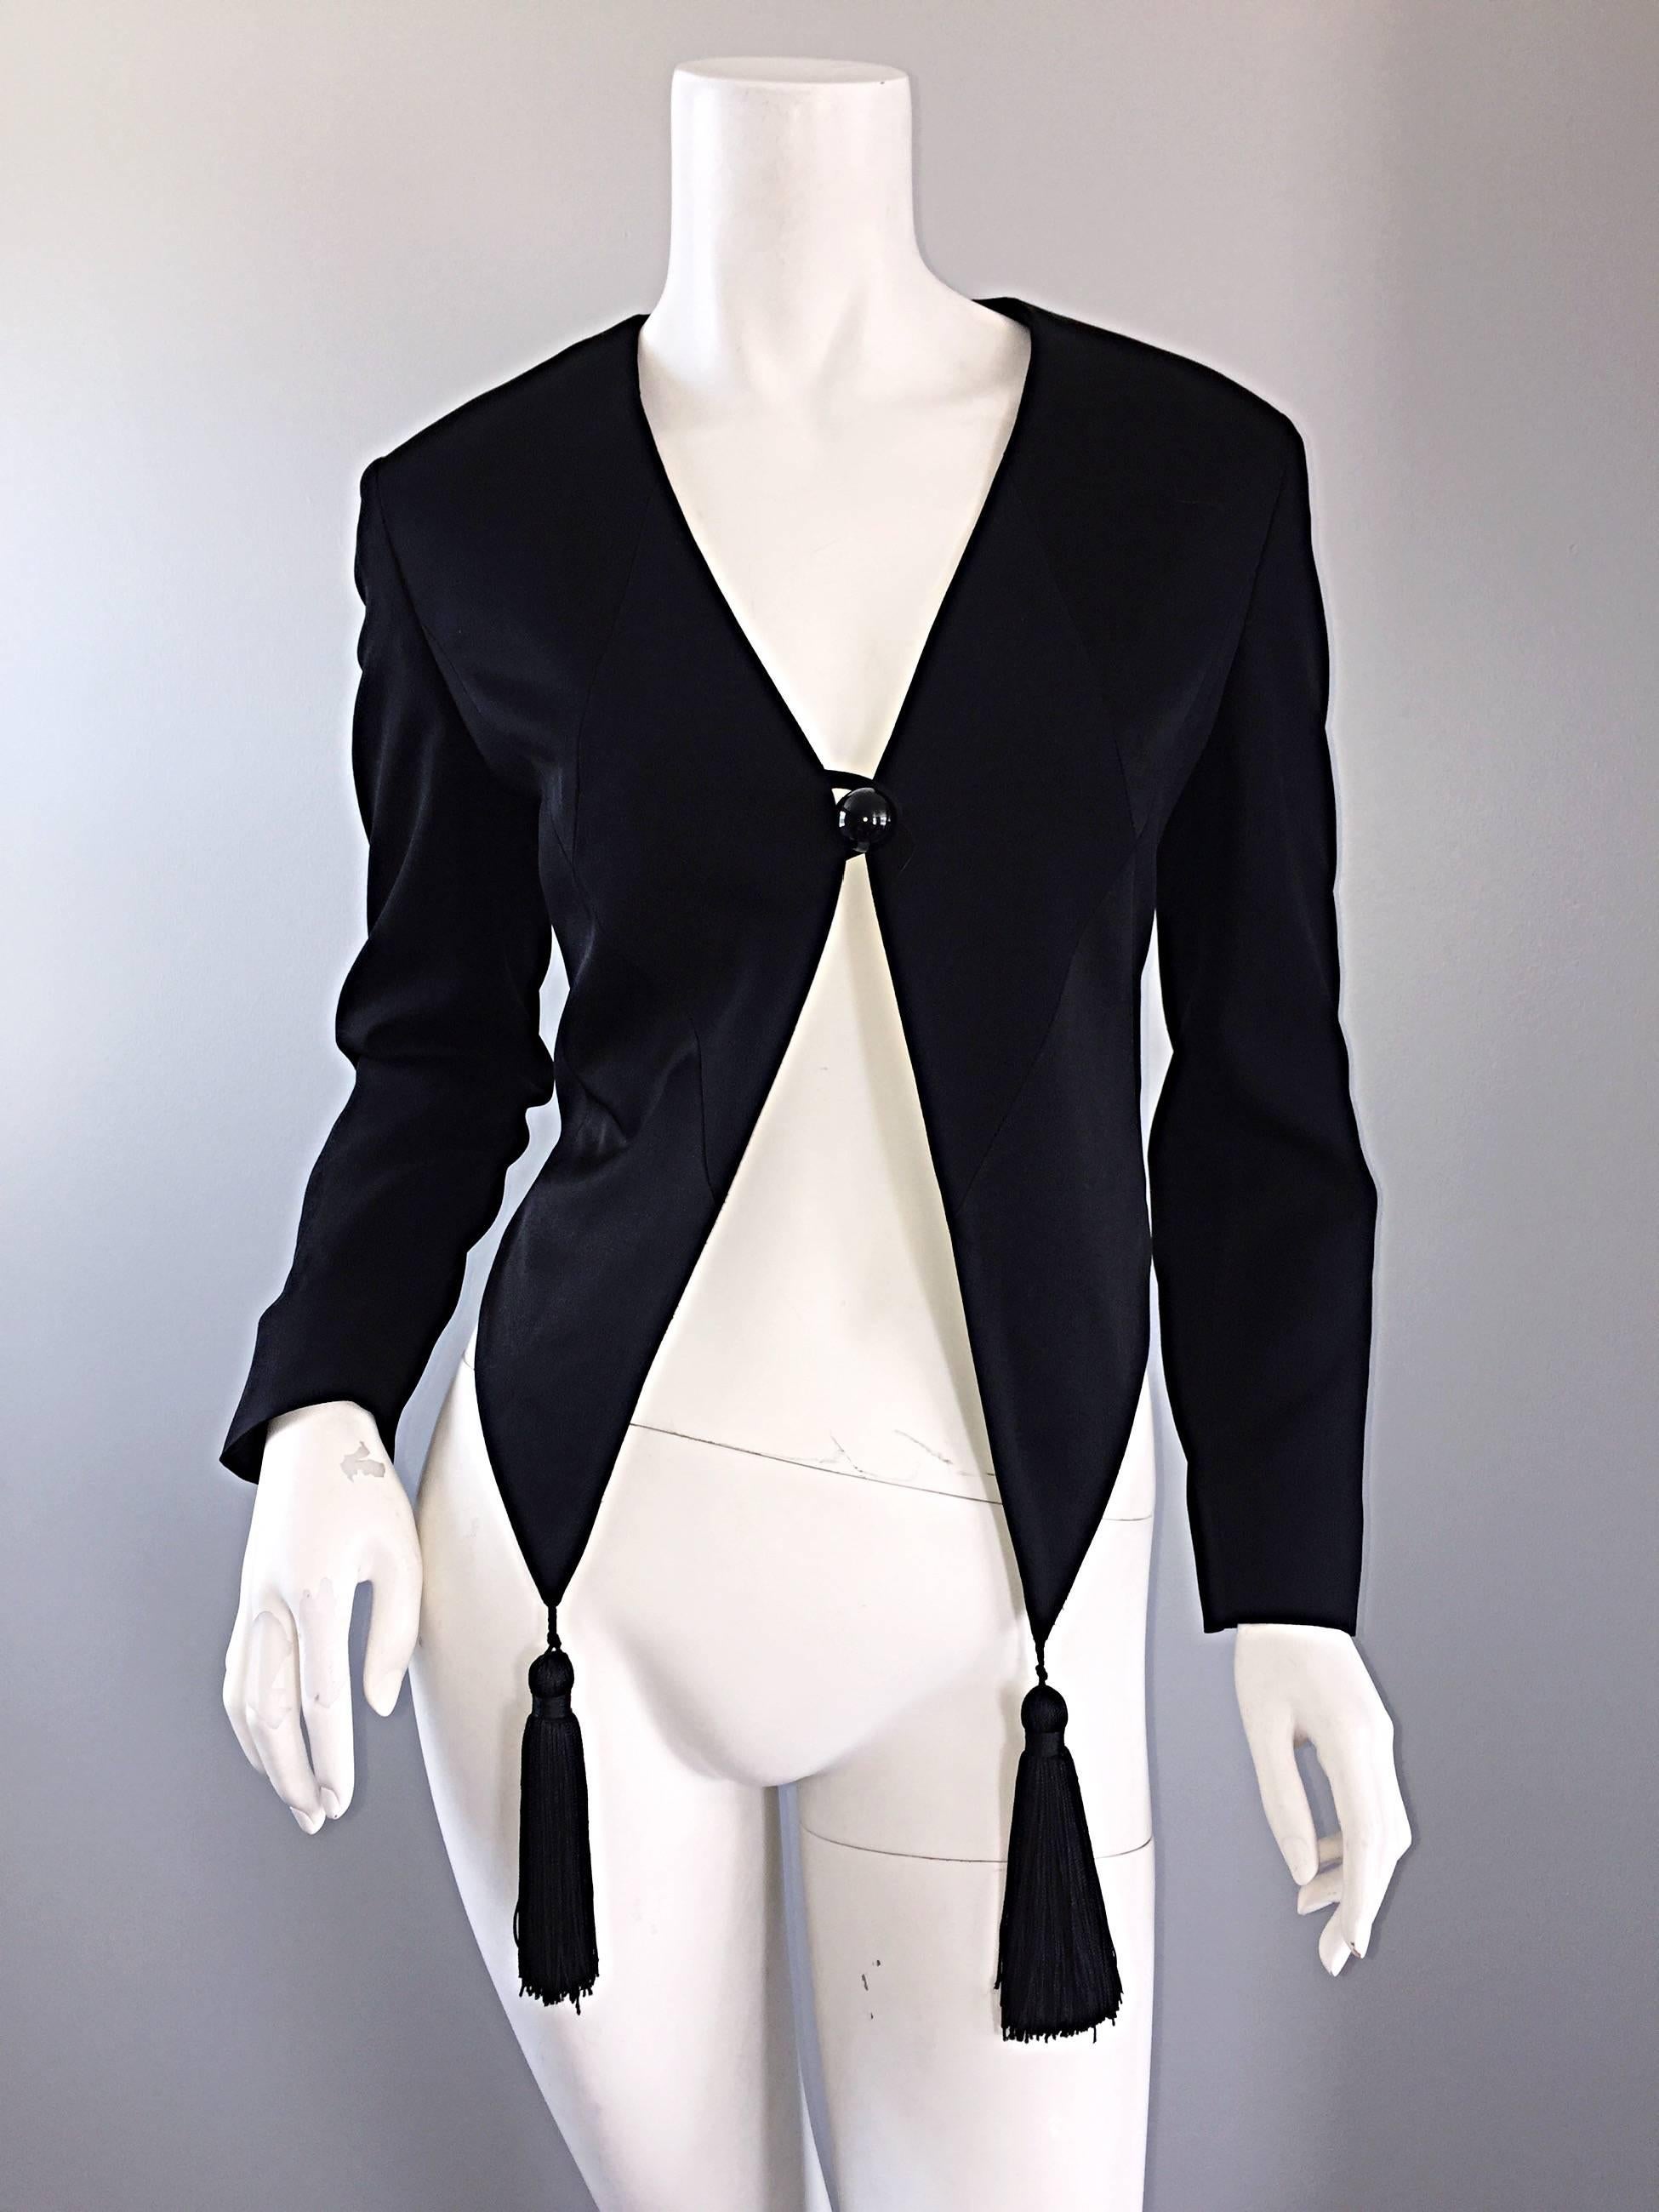 Incredible vintage MOSCHINO "Cheap & Chic" cropped black bolero jacket! Features two tassels at the front hem. Black silk satin triangular patchwork detail on the front. A fabulous fitting classic piece, with the slight quirkiness